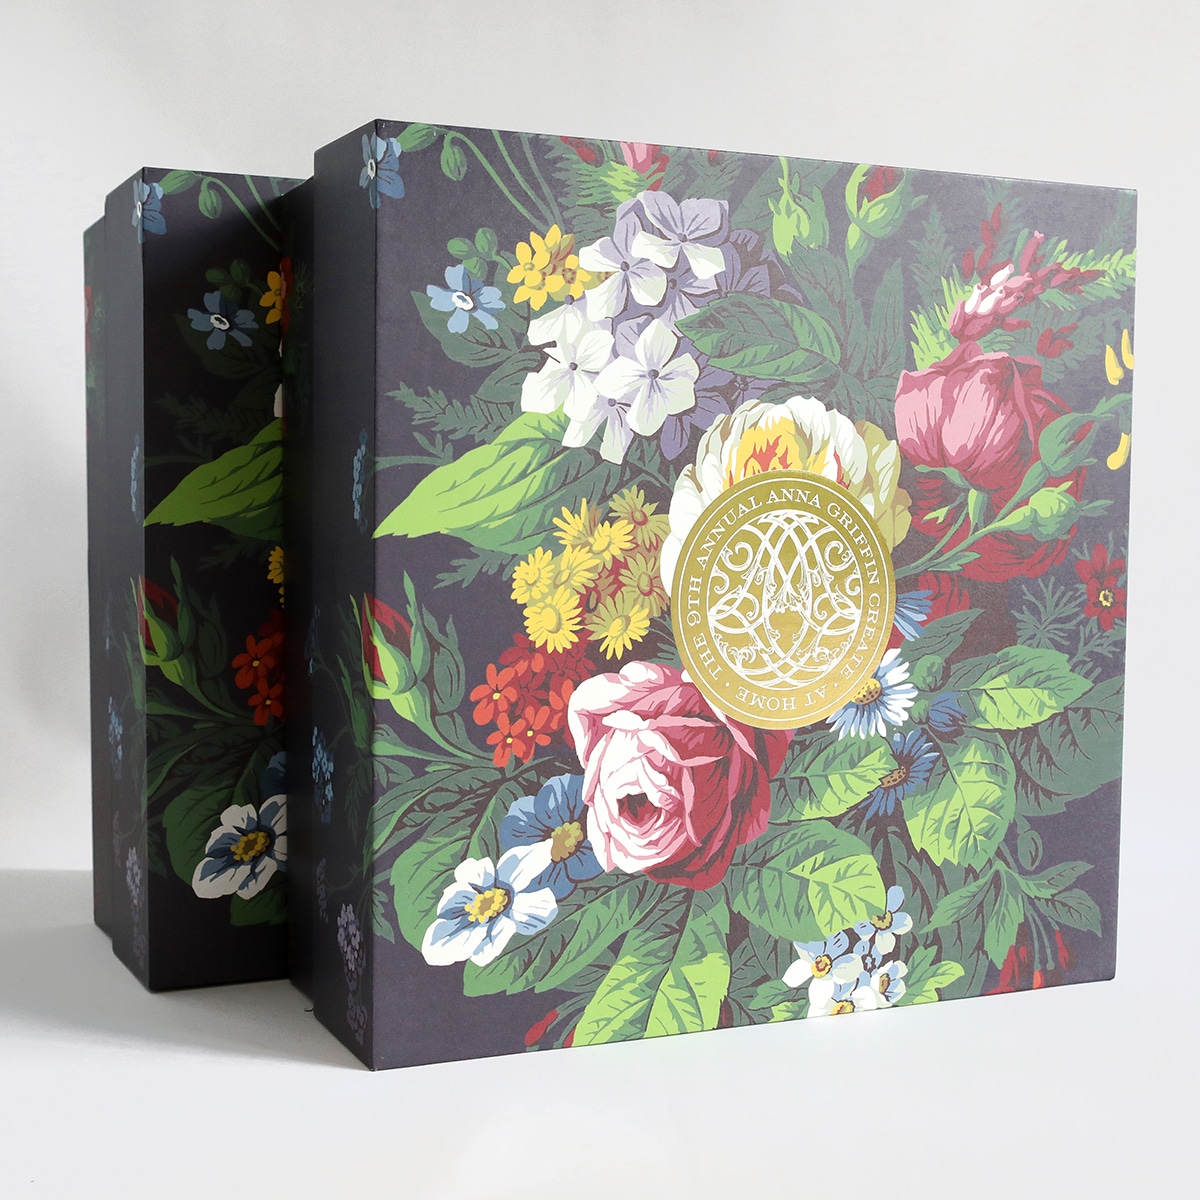 A black box with a floral design on it.